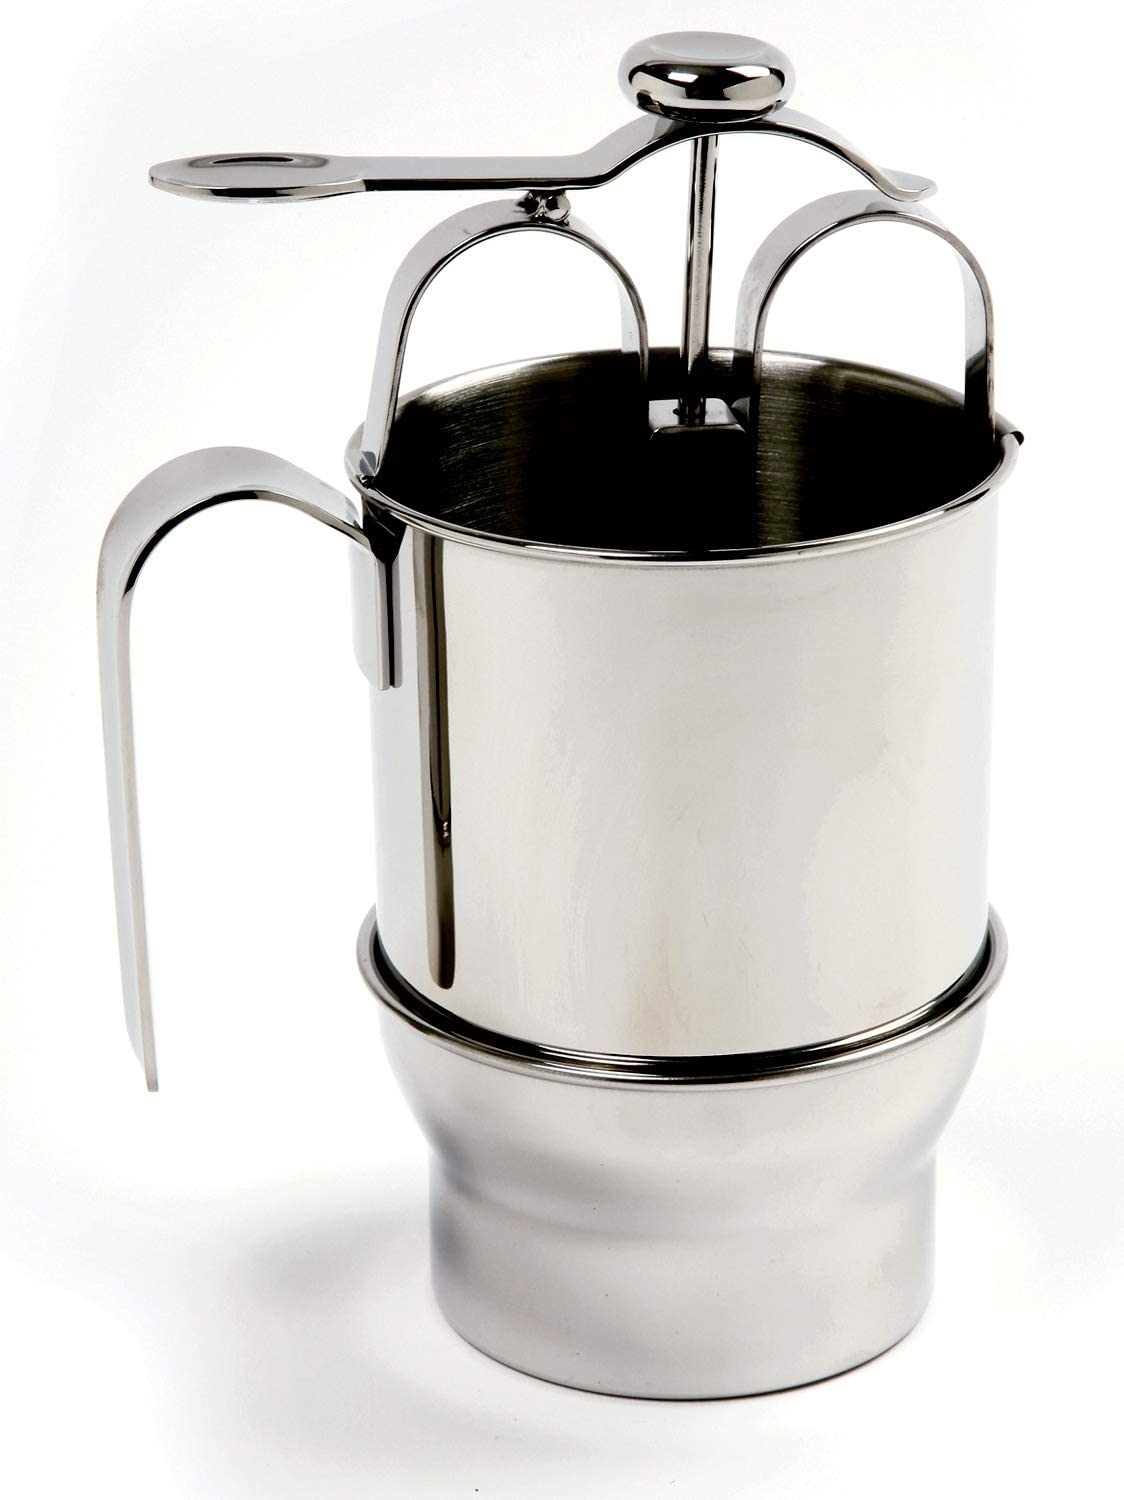 Norpro Stainless Steel Pancake Dispenser with Holder, One Size, As Shown Import To Shop ×Product customization General